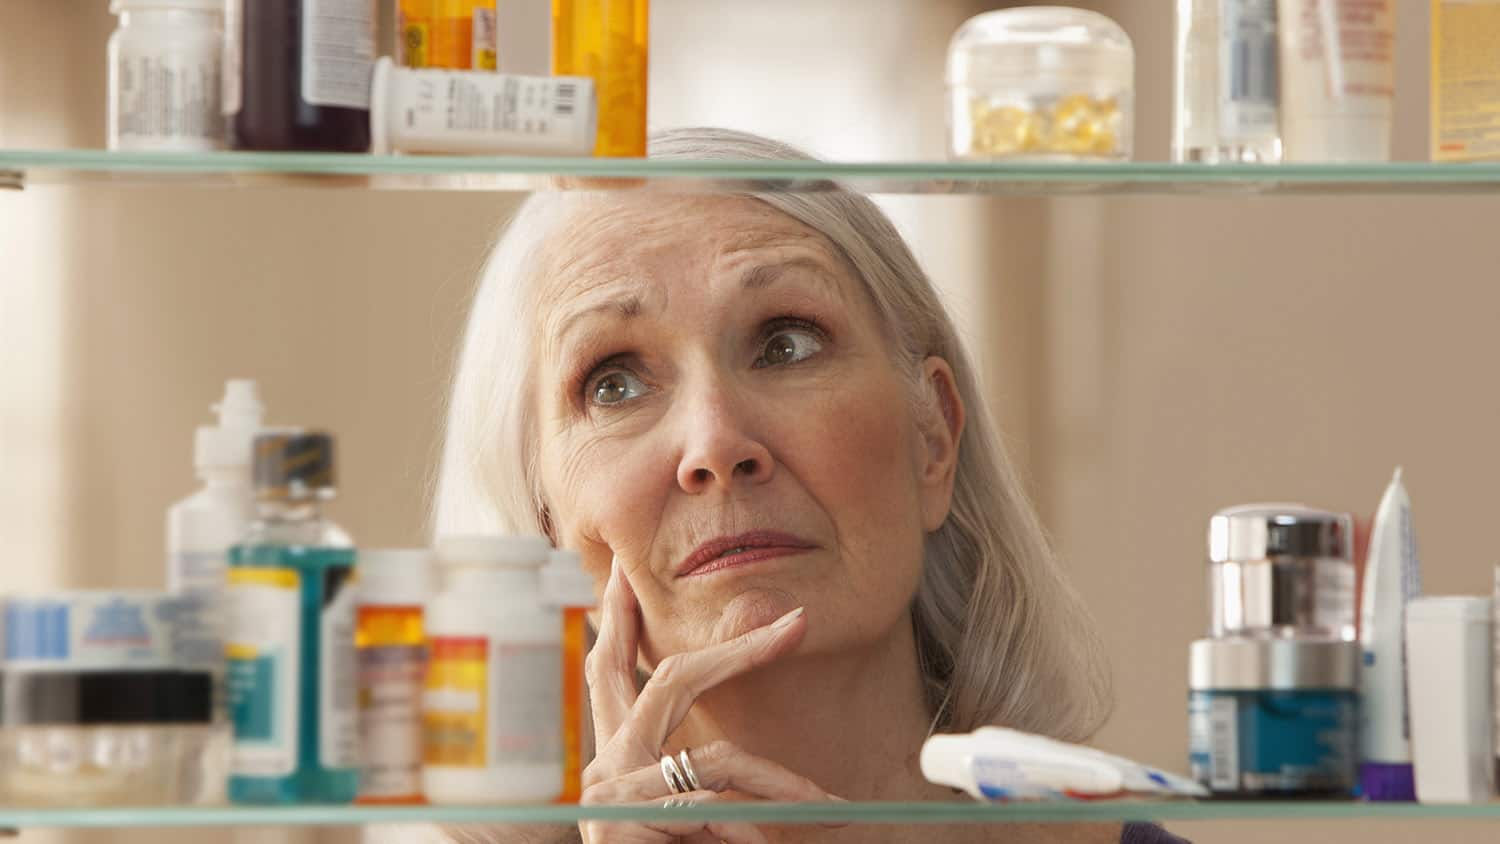 https://cdn.sixtyandme.com/wp-content/uploads/2018/01/Sixty-and-MeHow-to-Organize-Your-Medicine-Cabinet-for-Safety-and-Convenience.jpg